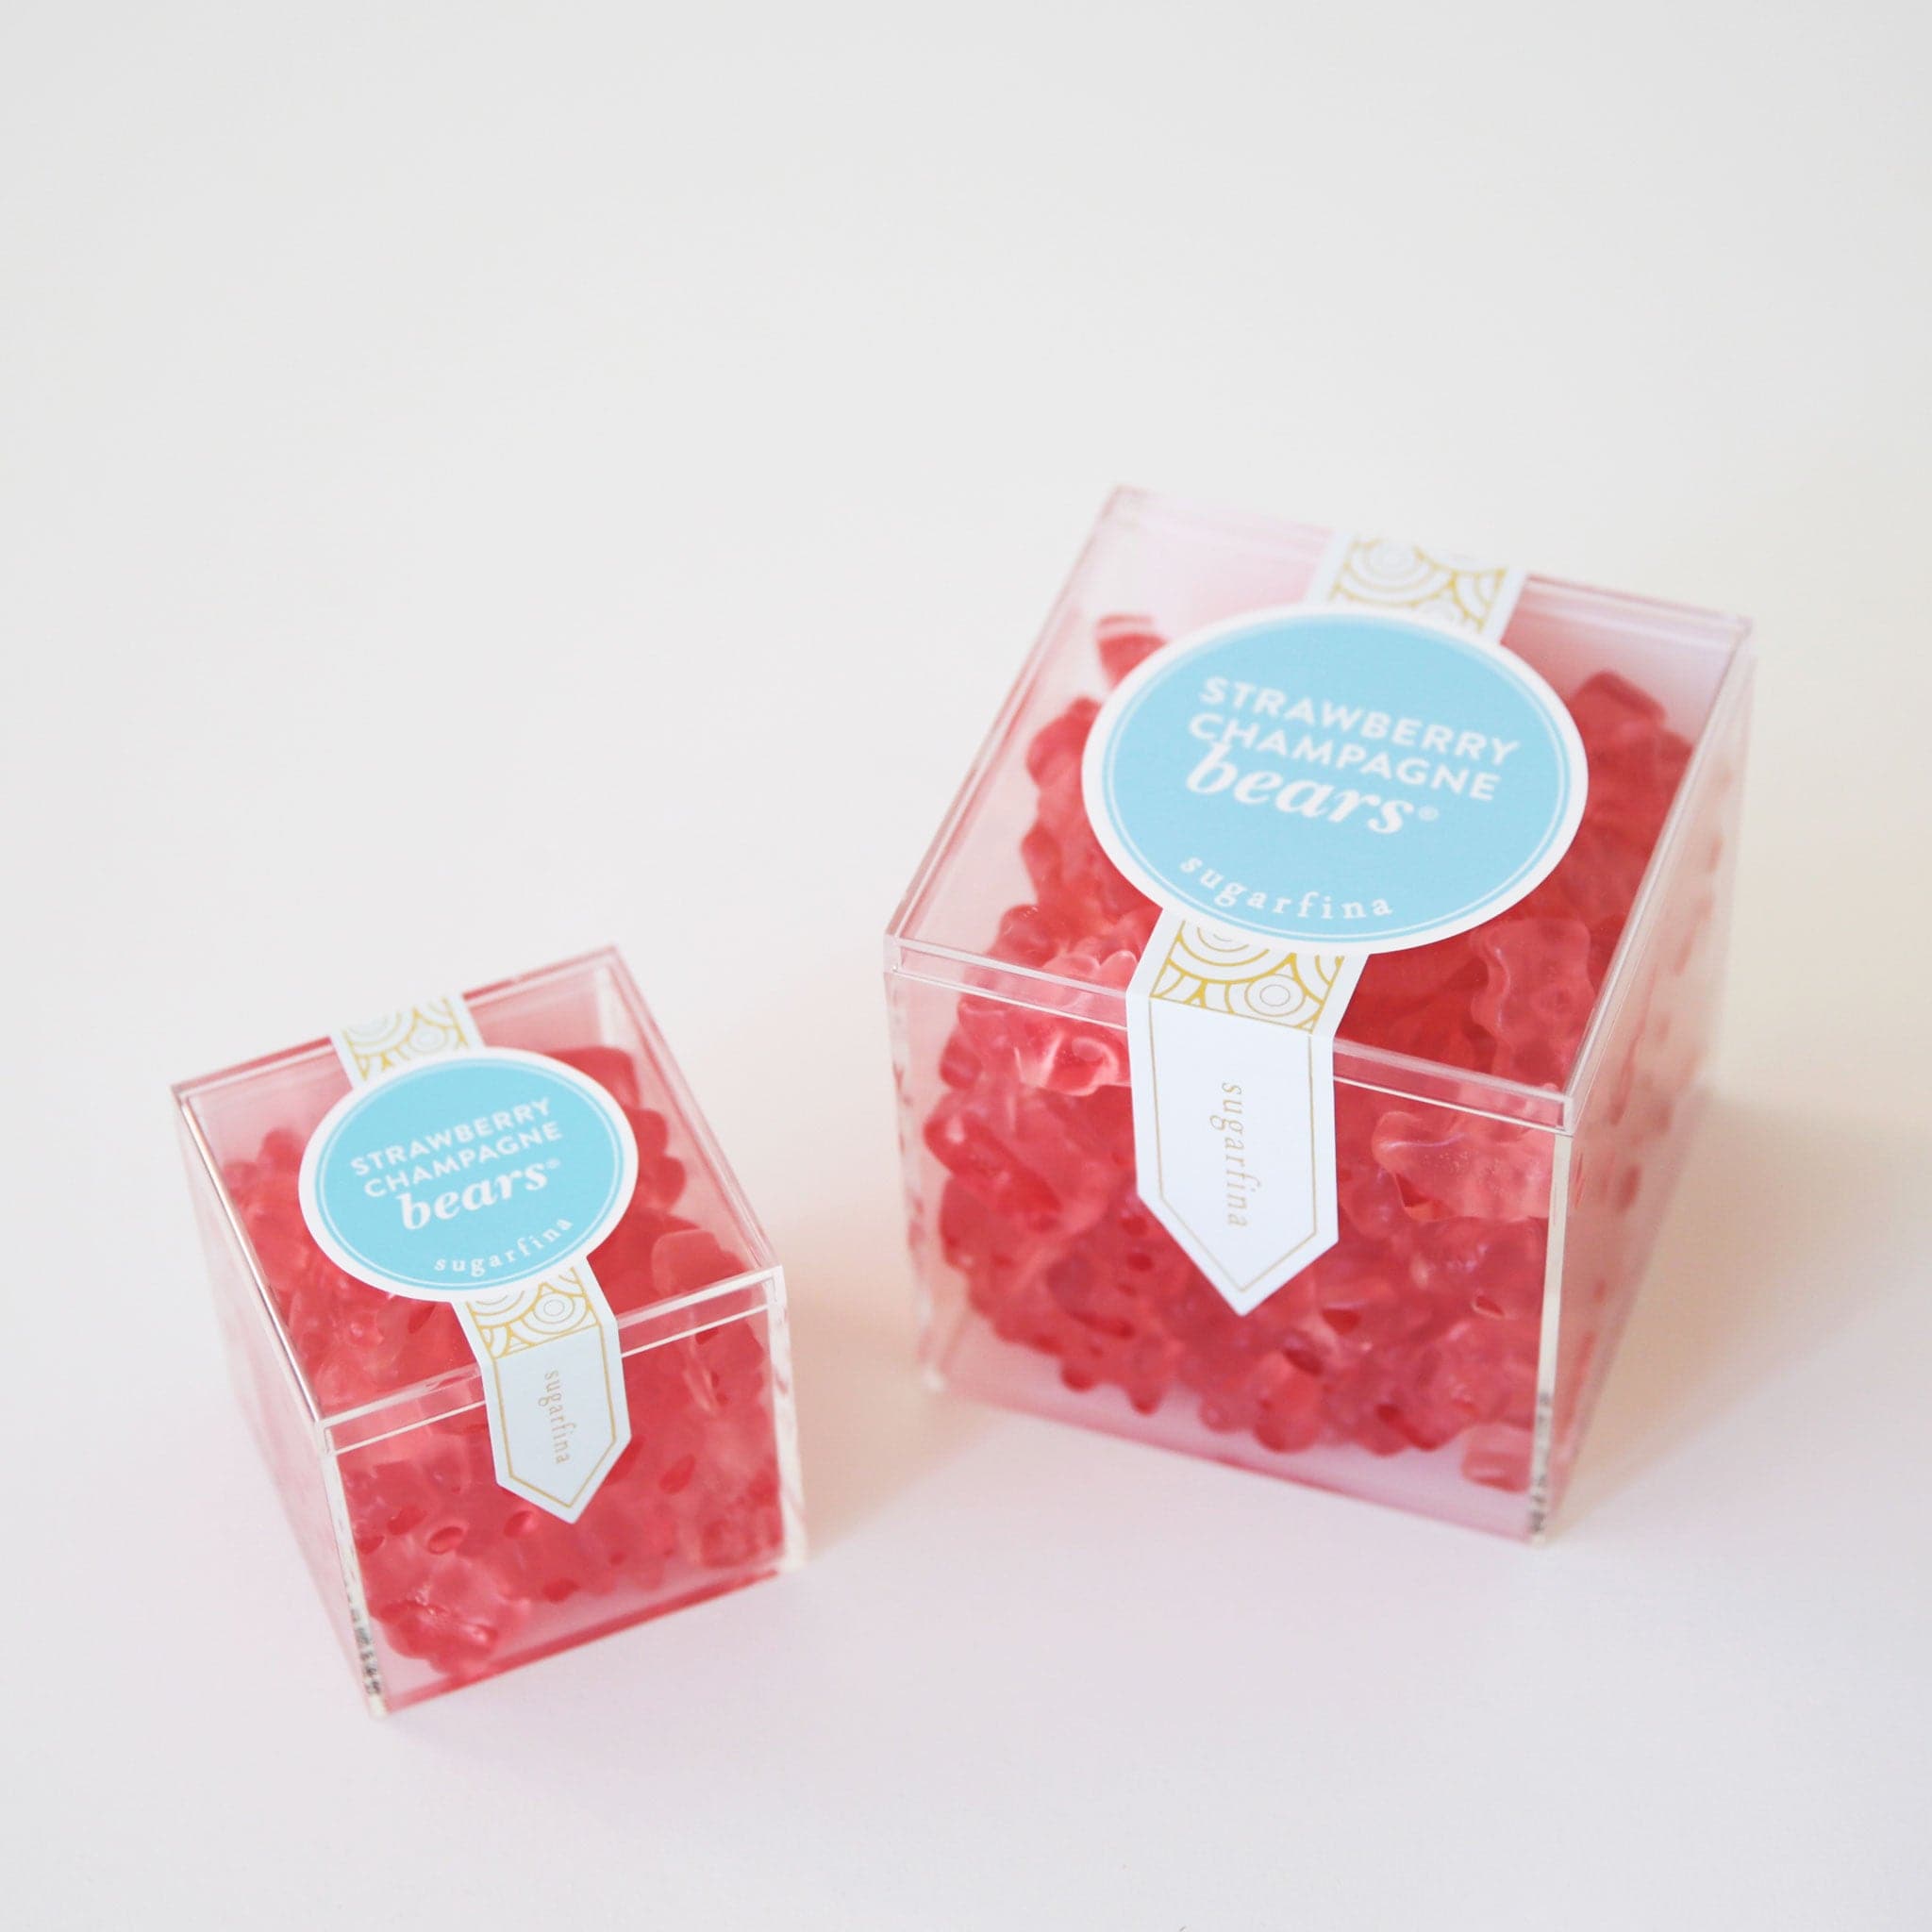 Two sizes of strawberry champagne gummy bears packaged in an acrylic box.